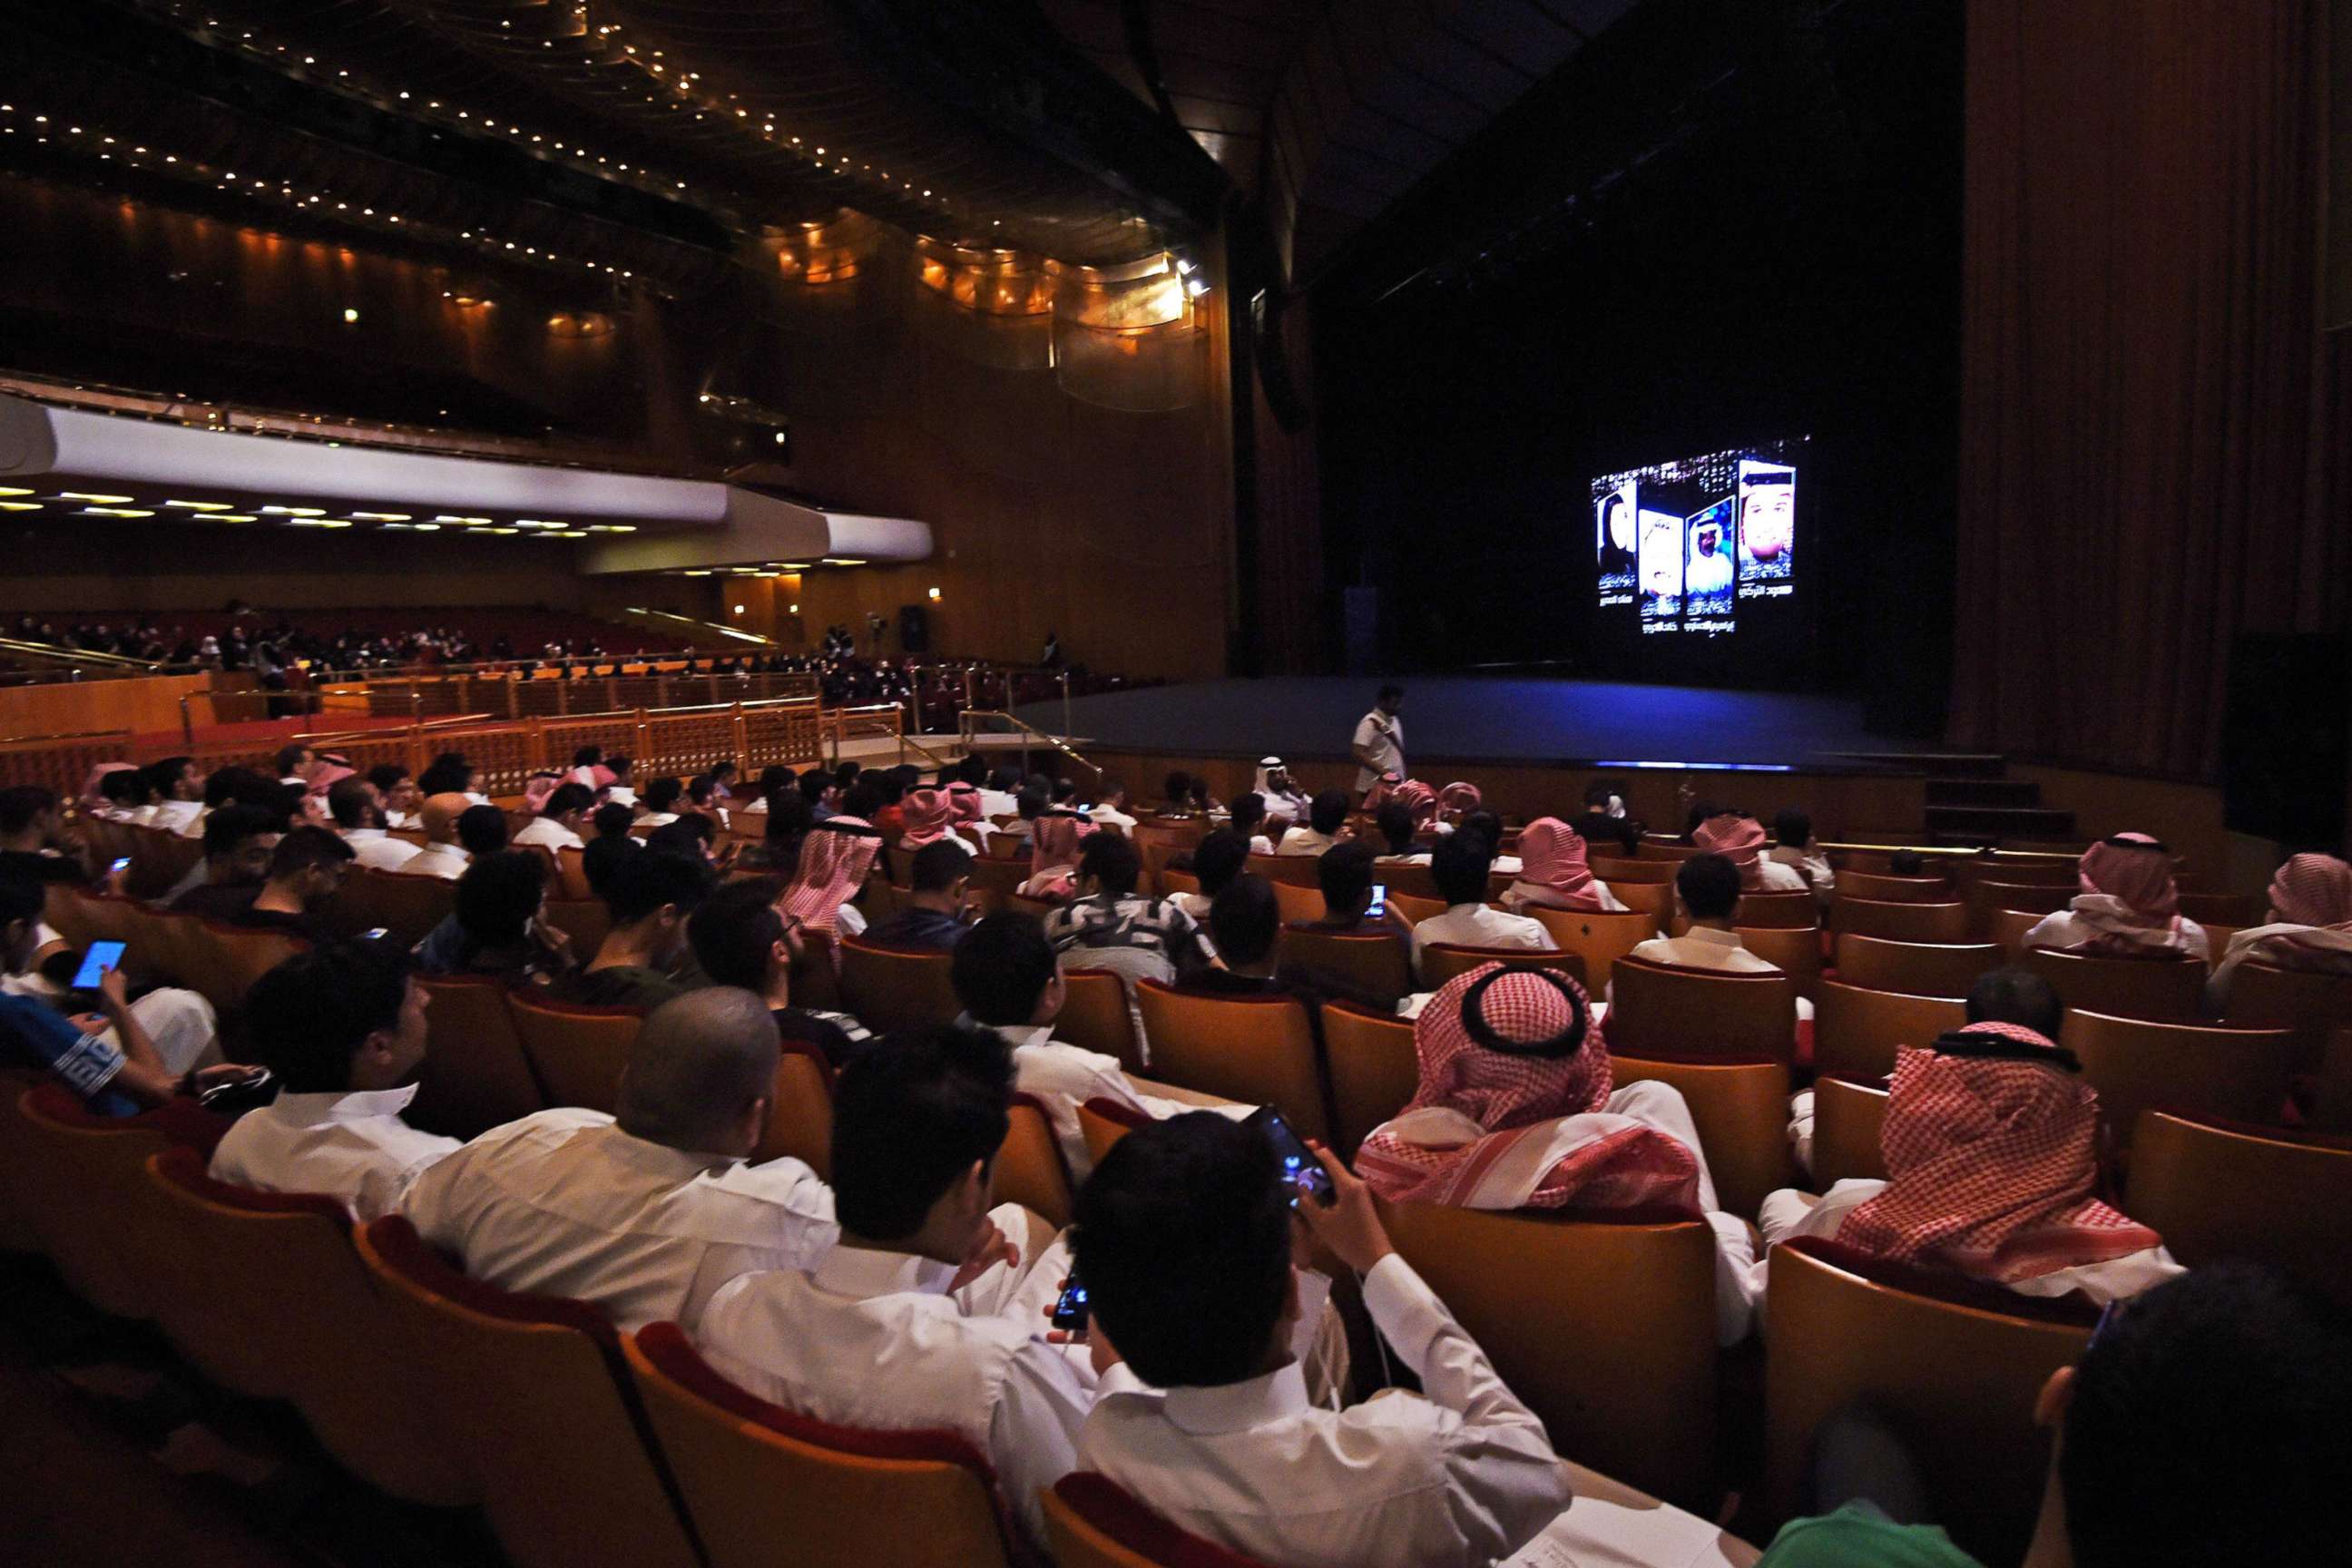 PHOTO: Saudis attend a film festival, Oct. 20, 2017, at the King Fahad Culture Center in Riyadh, Saudi Arabia. A decades-long ban on cinemas is to be lifted next year. 